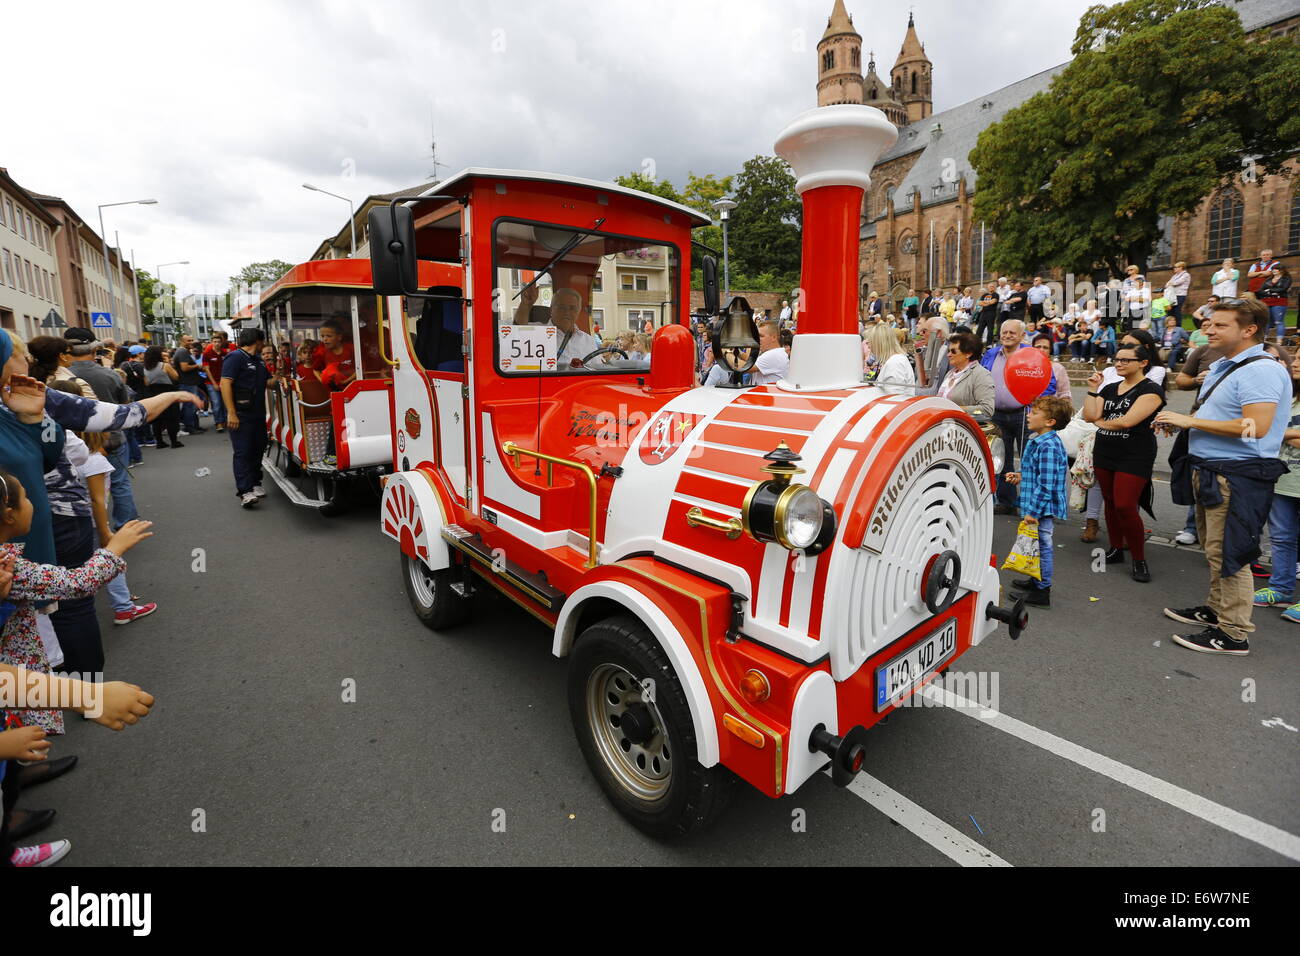 Worms, Germany. 31st Aug, 2014. The Nibelungen Bähnchen (Nibelungs little train) is pictured at the Backfischfest parade 2014. The cathedral of Worms can be seen in the background. The first highlight of this year's Backfischfest was the big parade through the city of Worms with 125 groups and floats. Community groups, sport clubs, music groups and business from Worms and further afield took part. © Michael Debets/Pacific Press/Alamy Live News Stock Photo